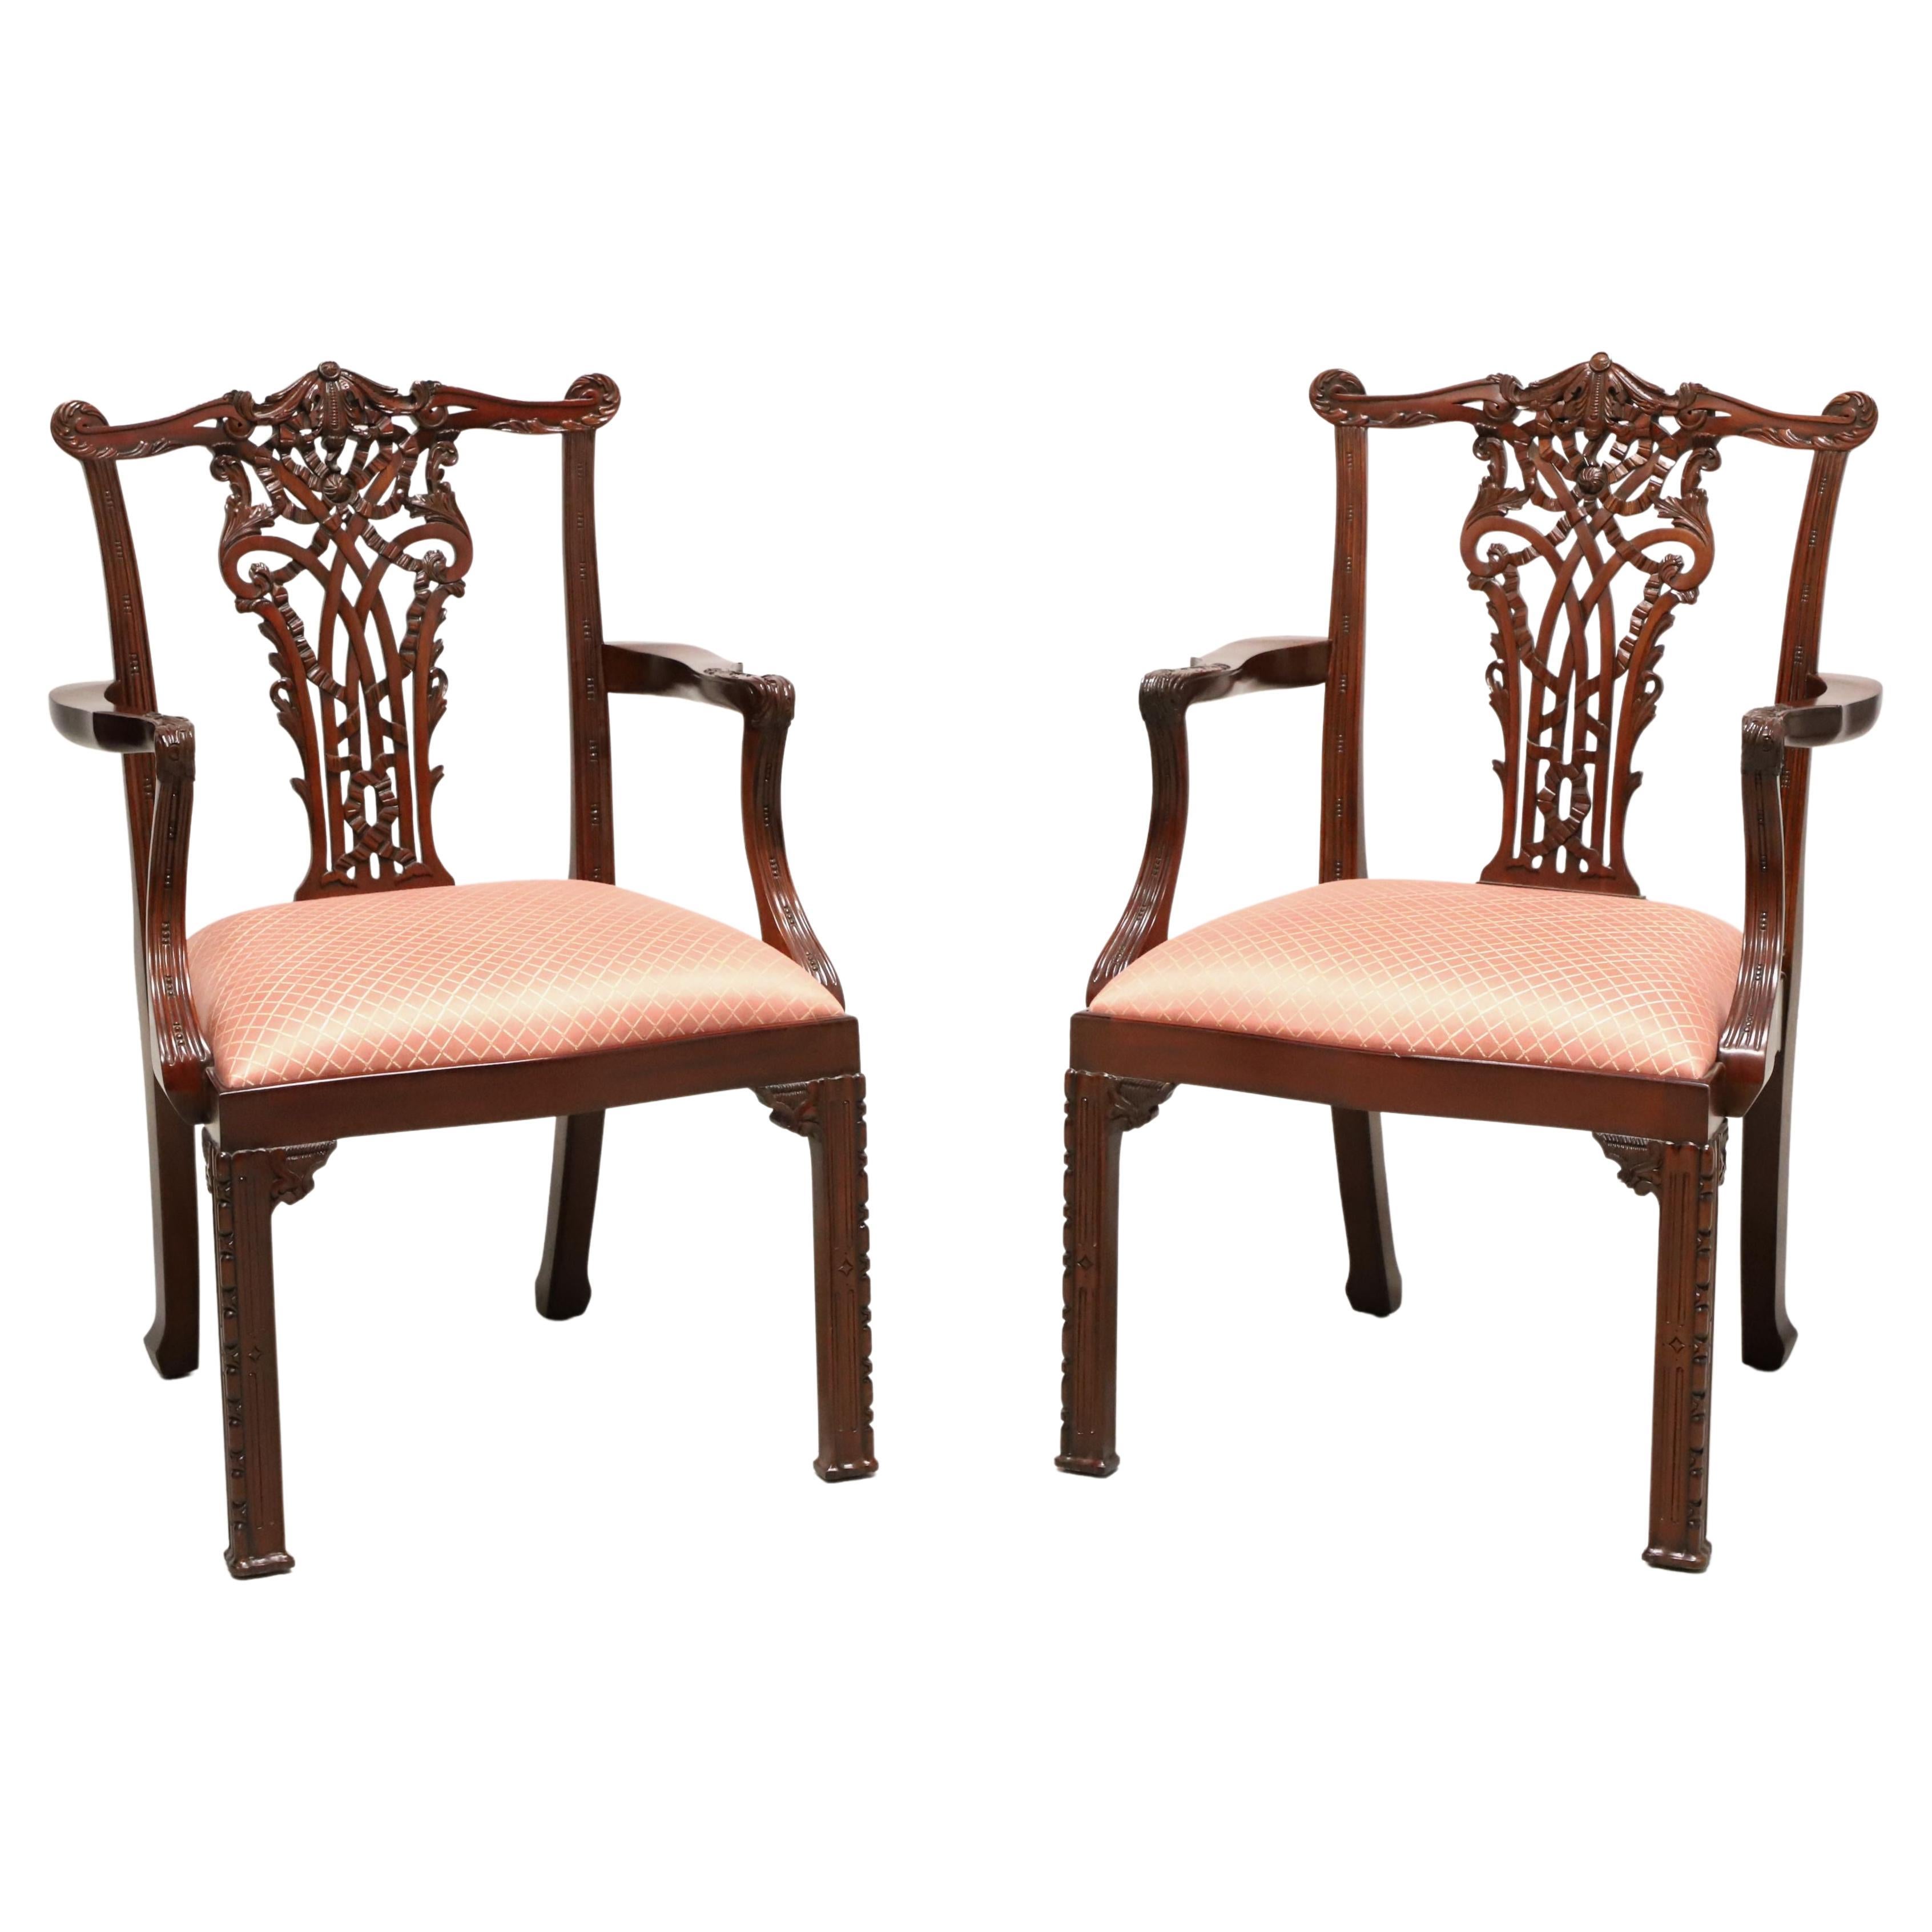 MAITLAND SMITH Mahogany Chinese Chippendale Fretwork Dining Armchairs - Pair